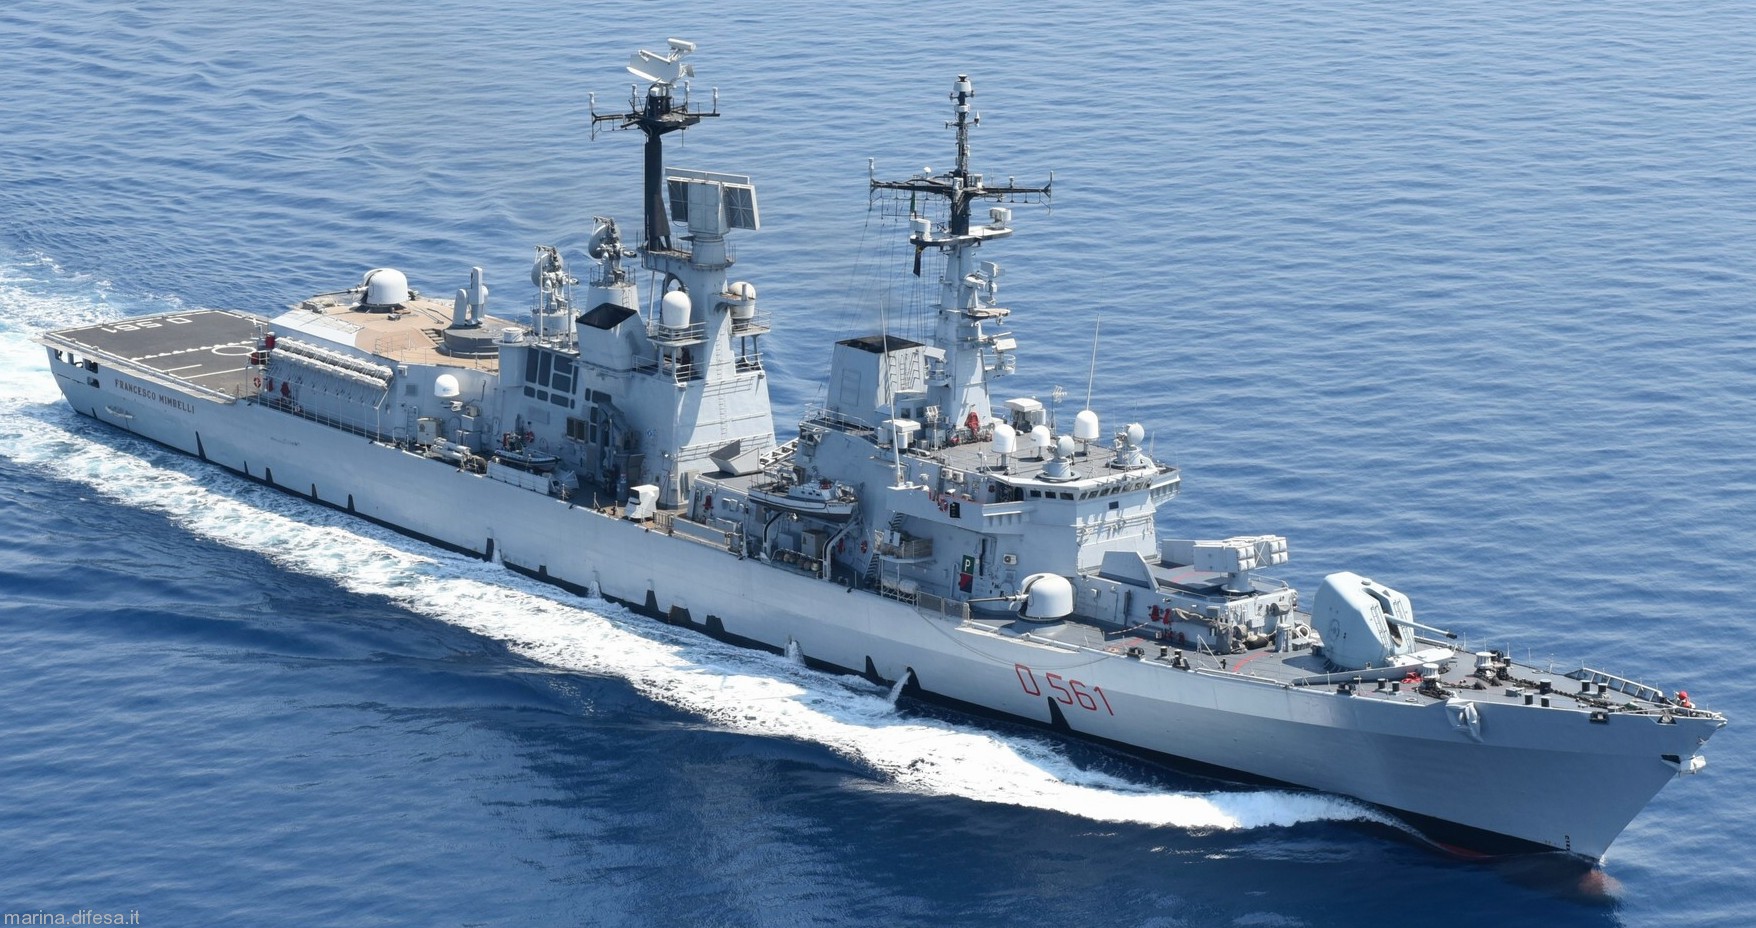 d-561 francesco mimbelli its nave guided missile destroyer ddg italian navy marina militare 30